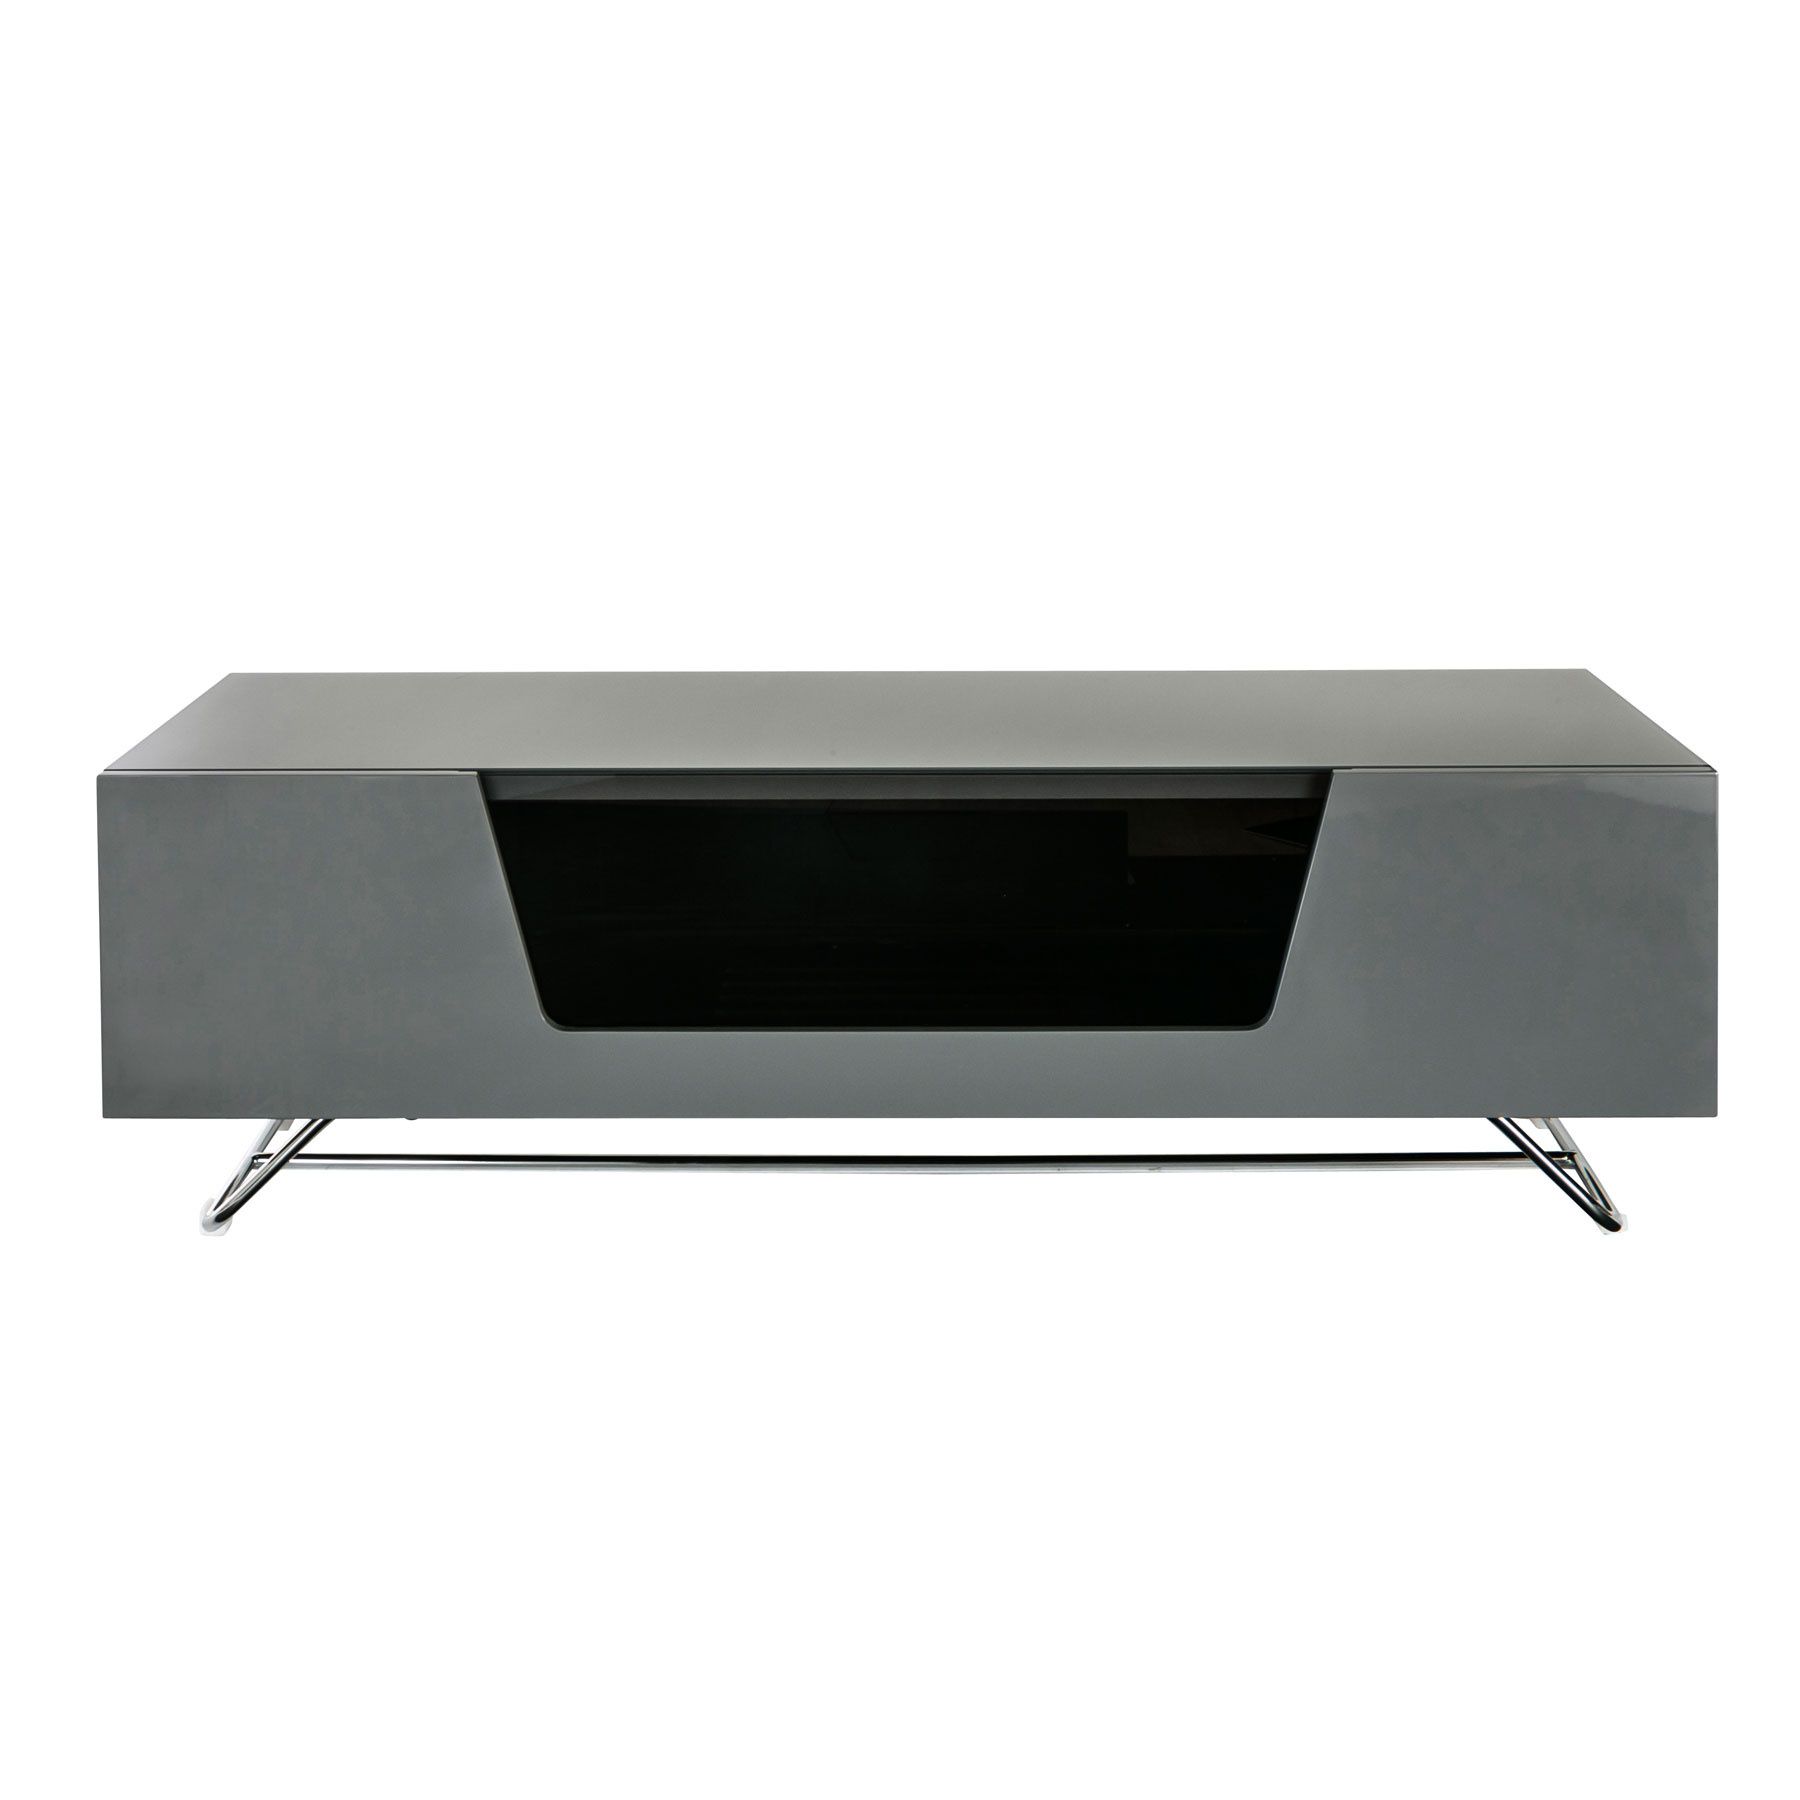 Alphason Chromium 2 120cm Grey Tv Stand For Up To 60" Tvs In Chromium Tv Stands (View 3 of 15)